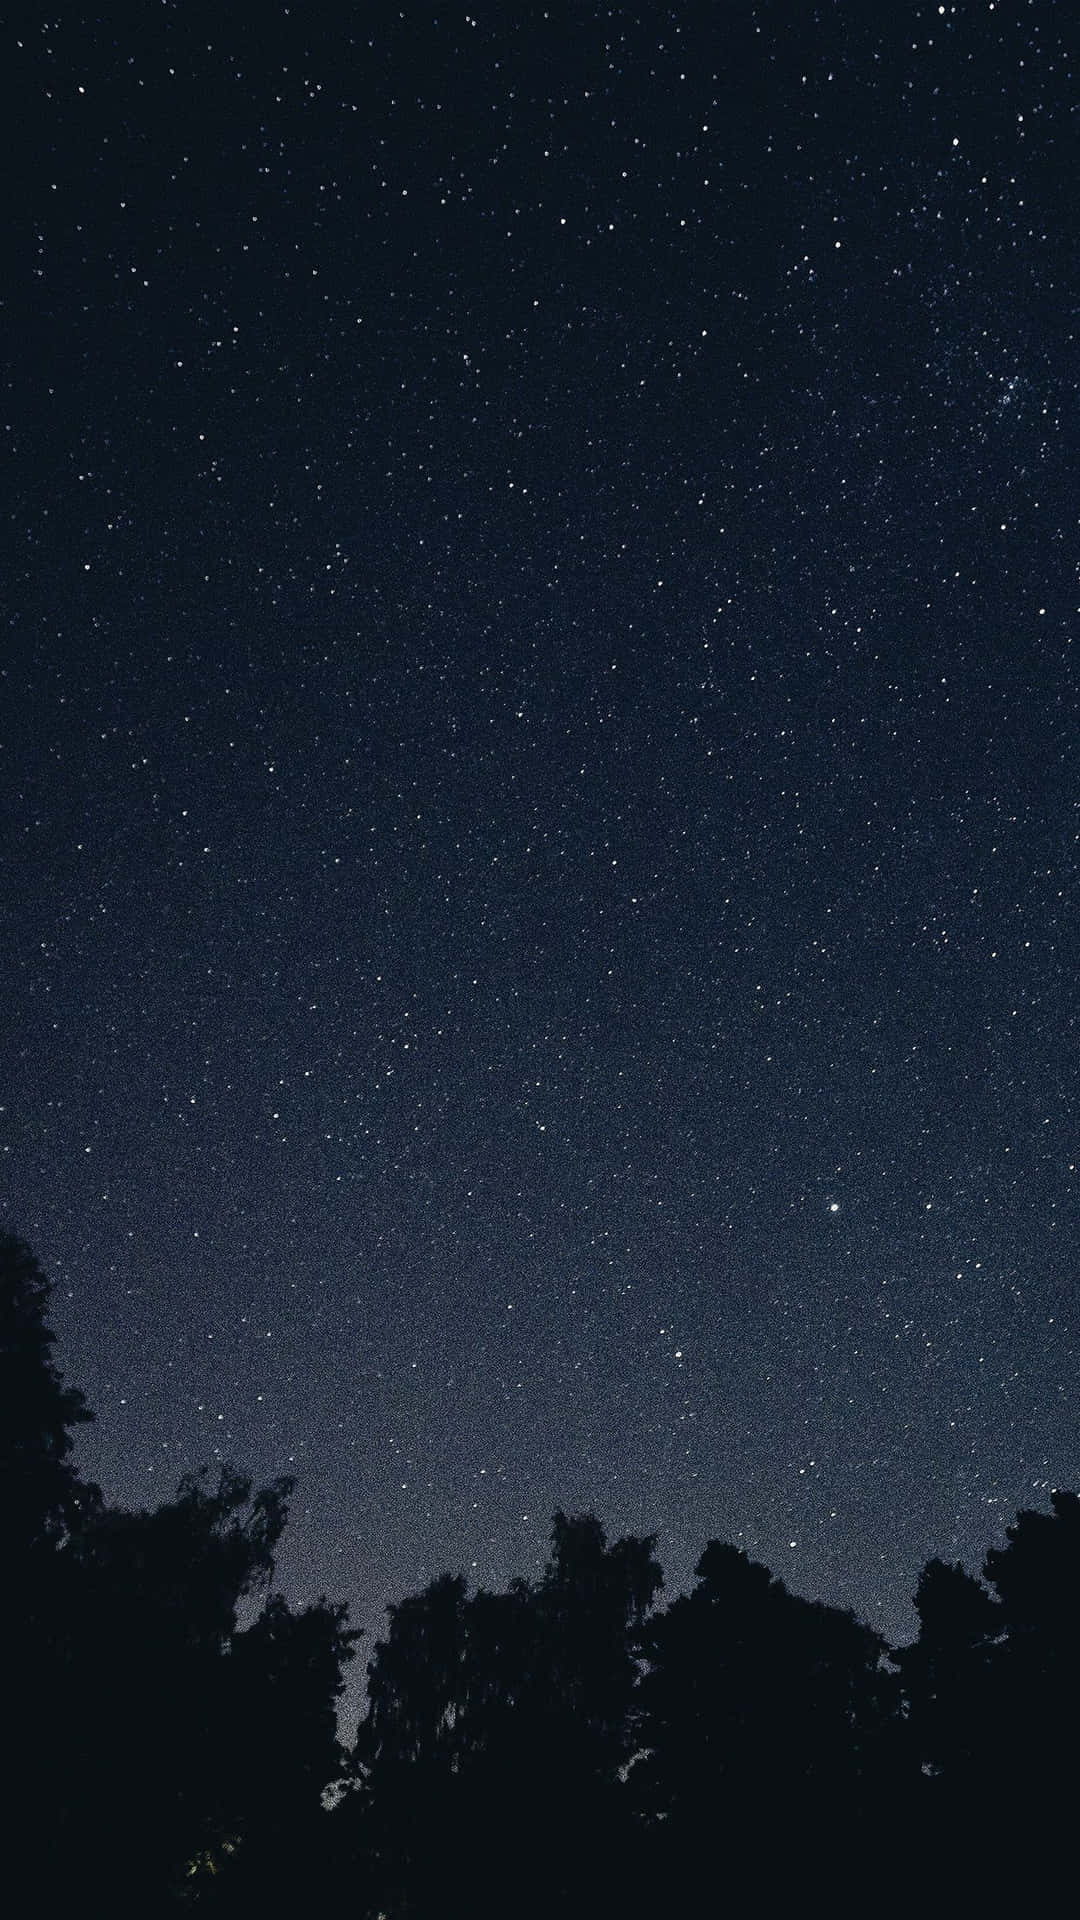 Mysterious Dark Sky Filled with Stars Wallpaper